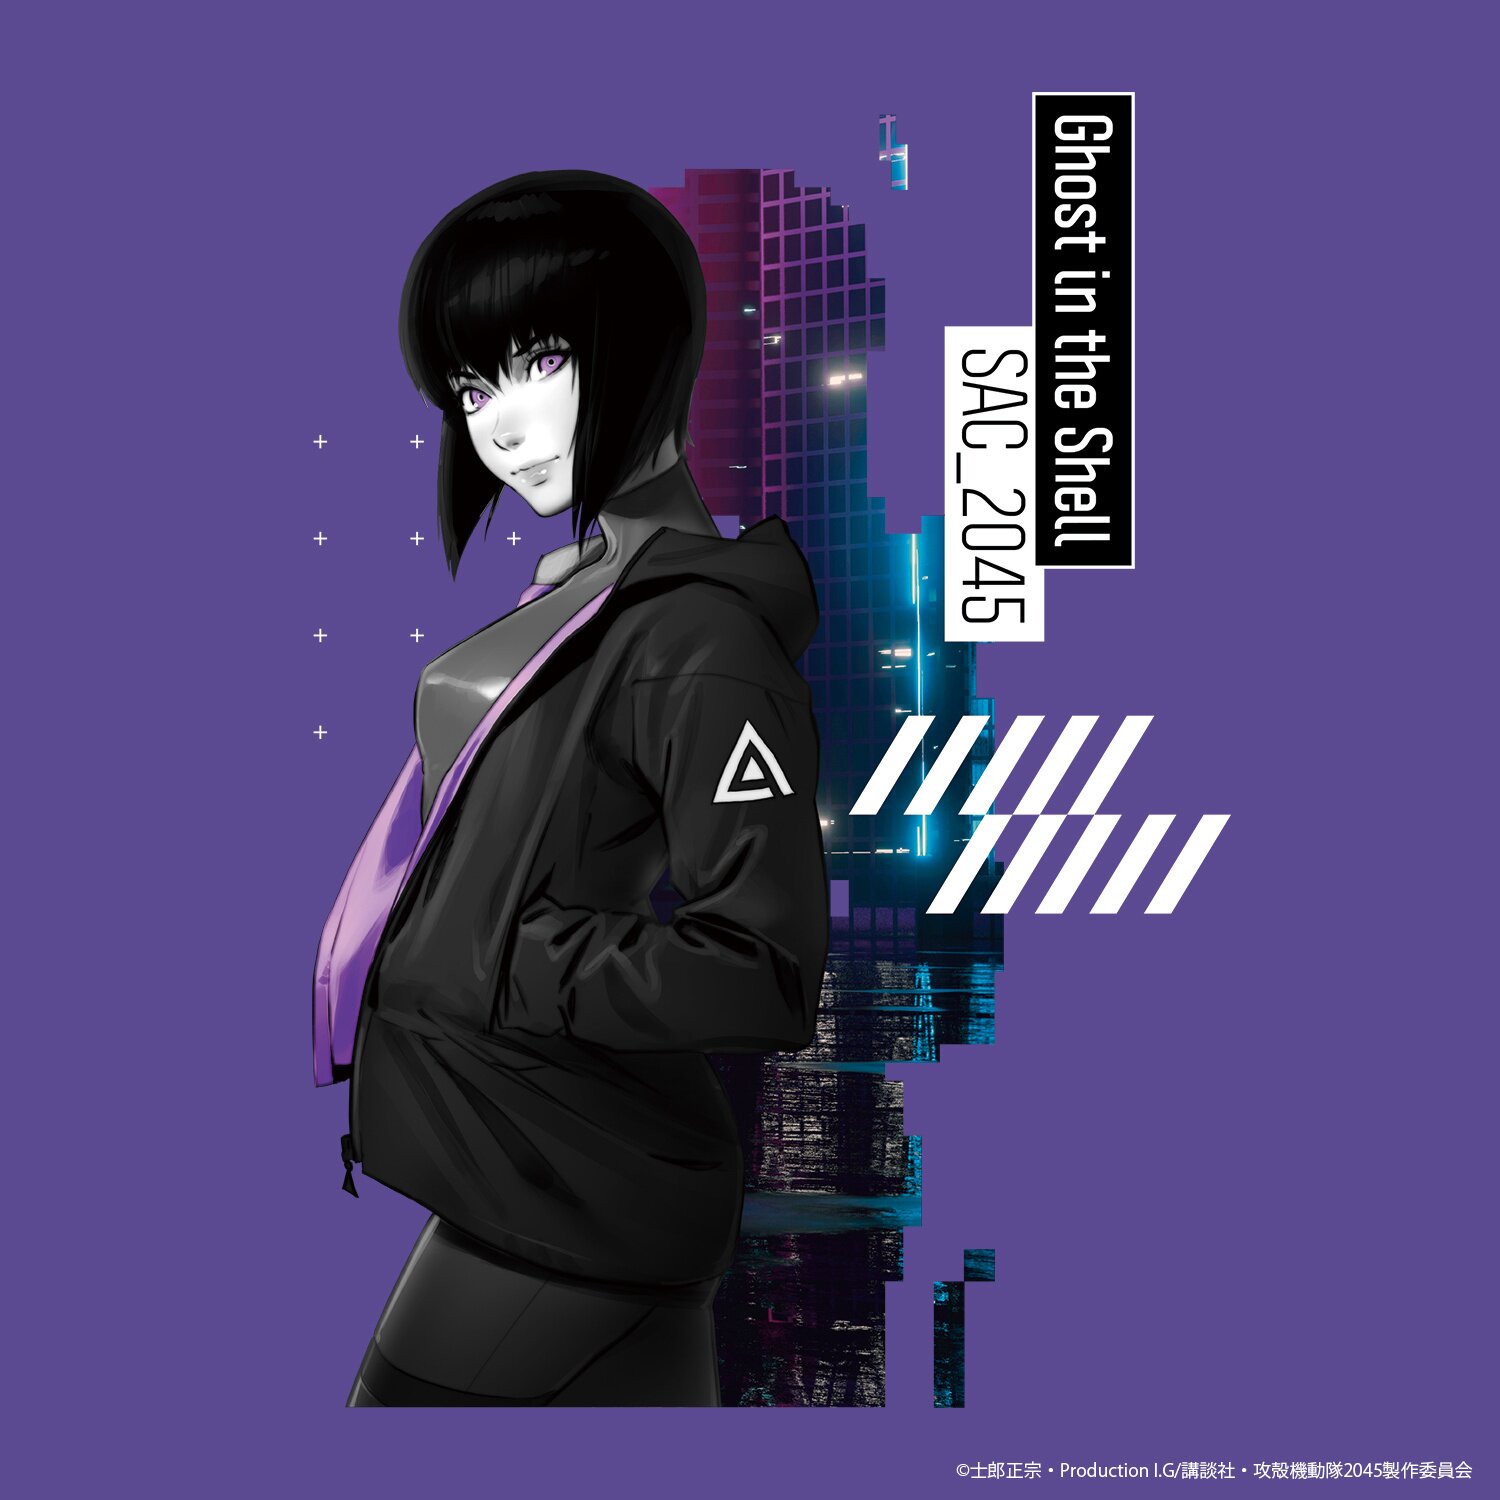 Ghost in the Shell: SAC_2045 Purple Long Sleeve T-Shirt